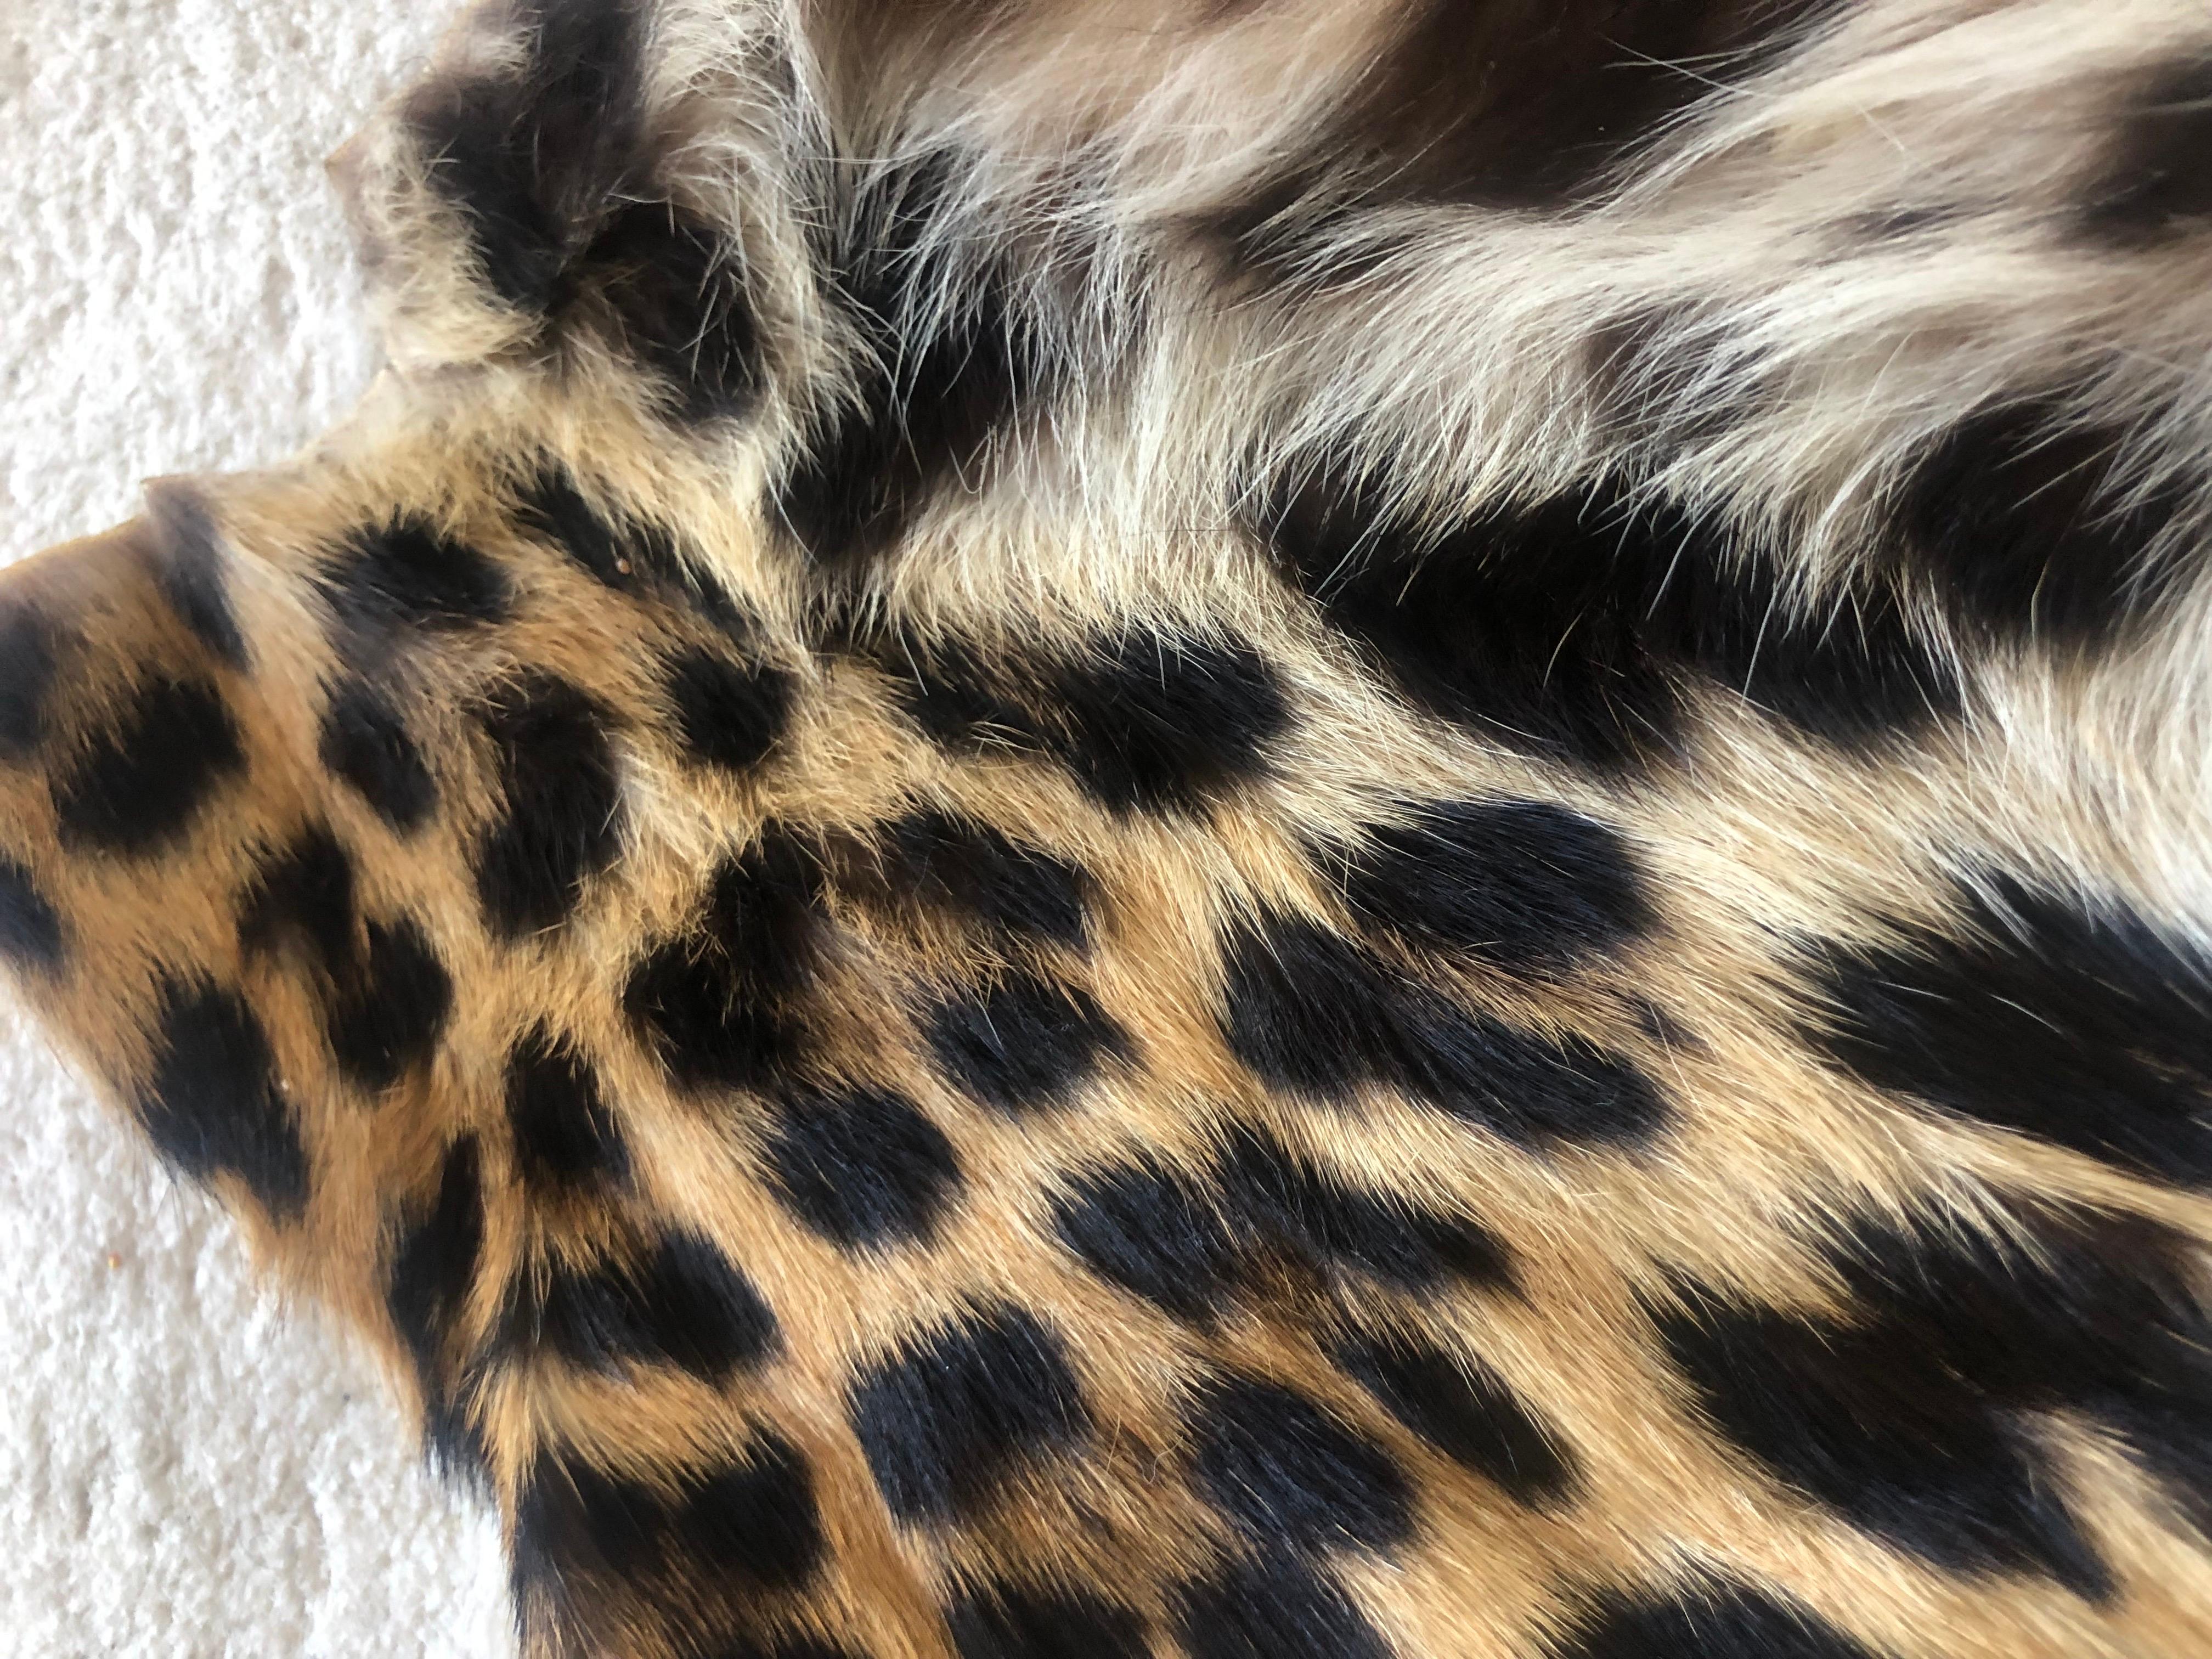 Vintage leopard fur collar and pieces for arts and craft to wear or project 11